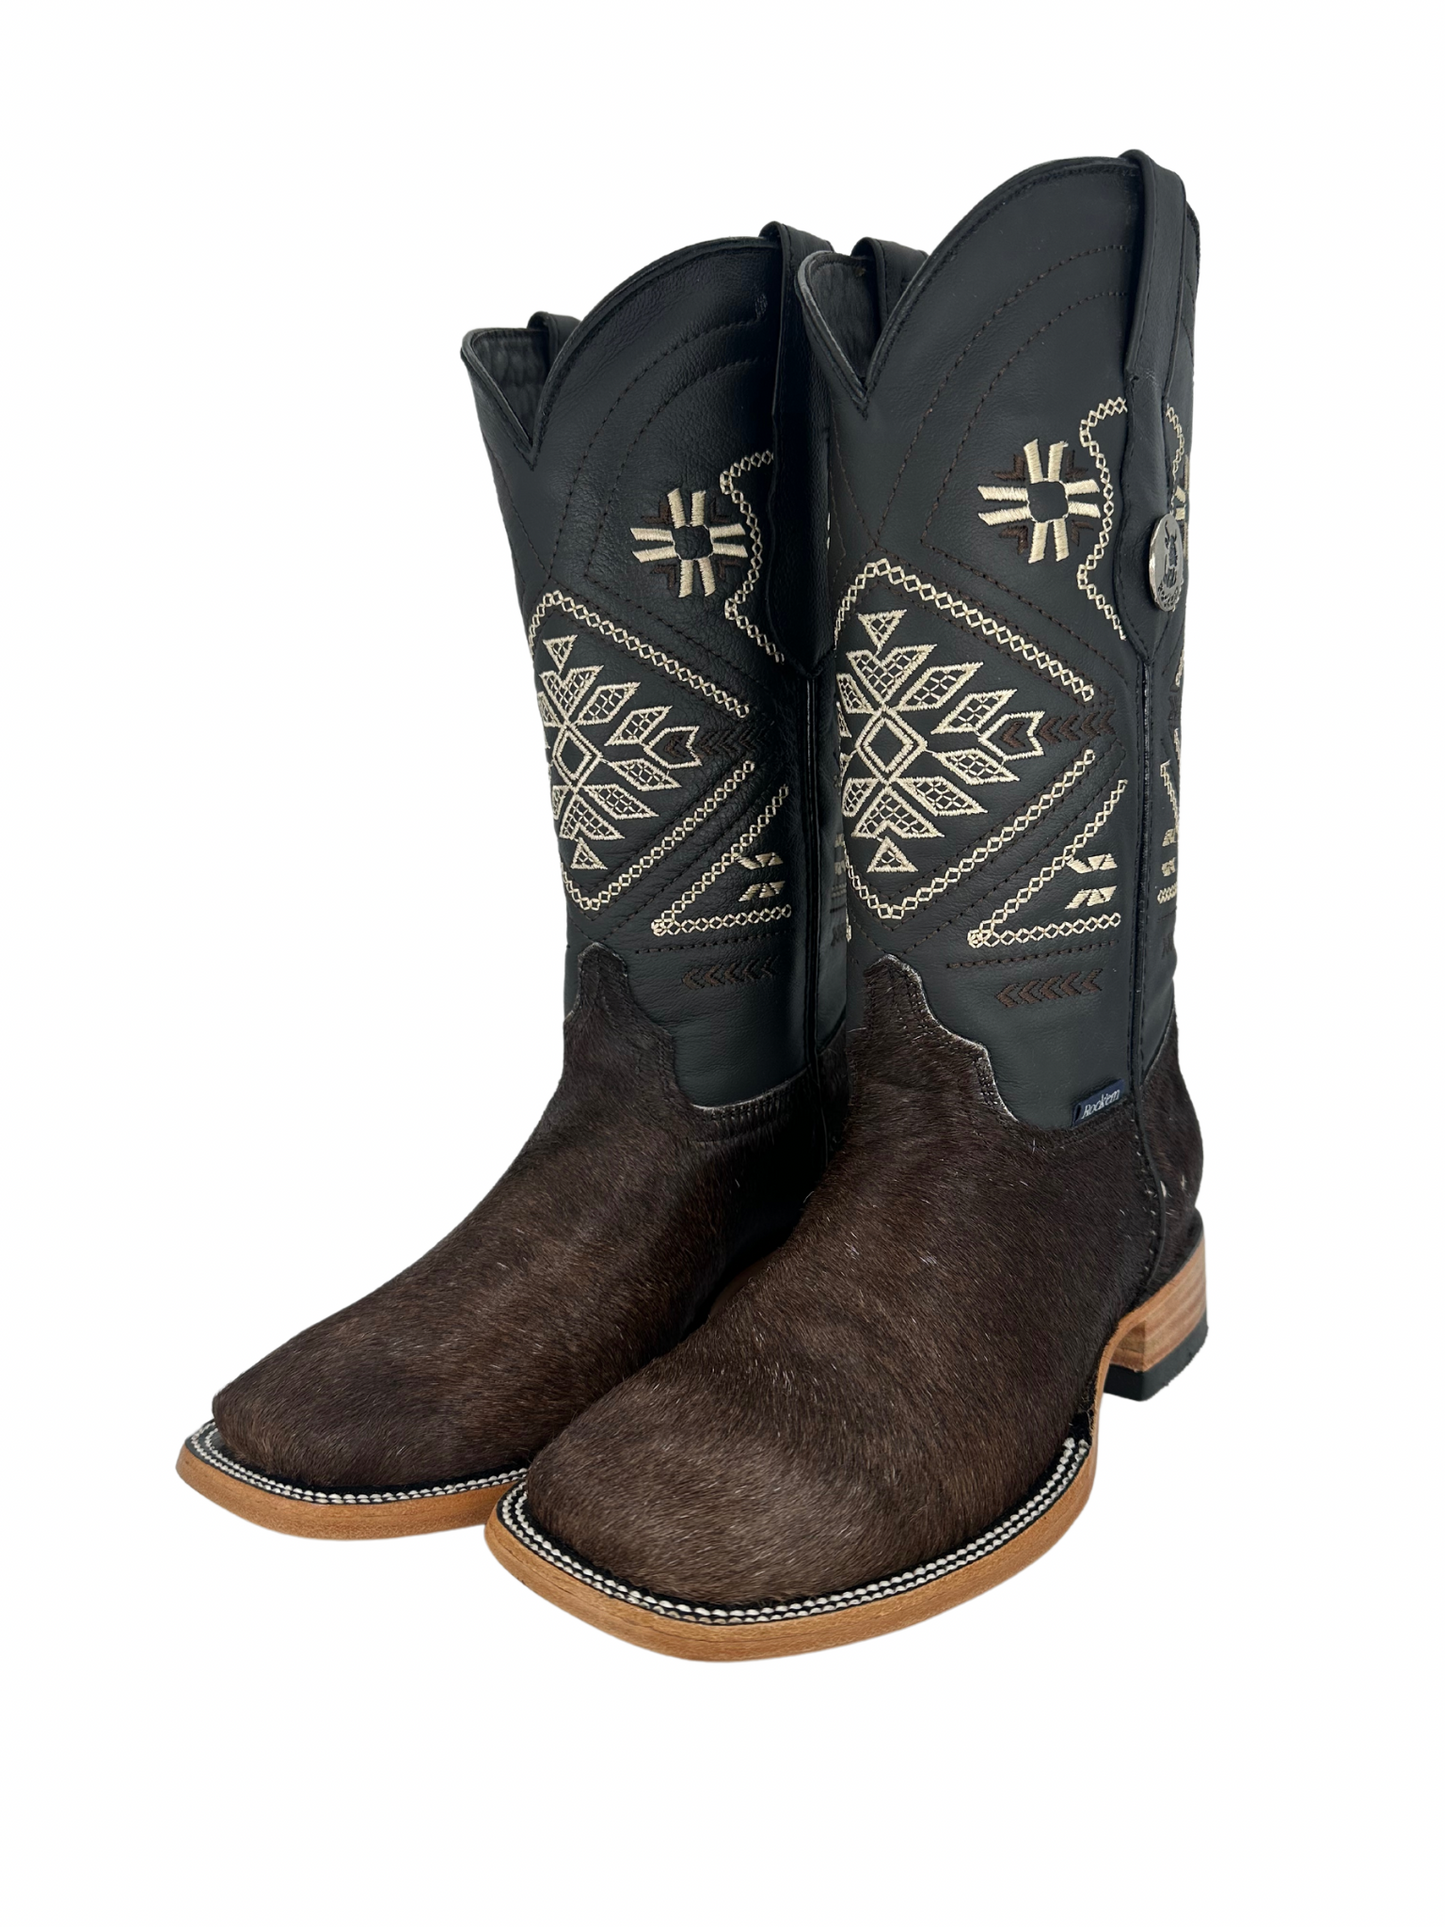 Rock'em Women's Cow Hair Boots Size: 7 *AS SEEN ON IMAGE*